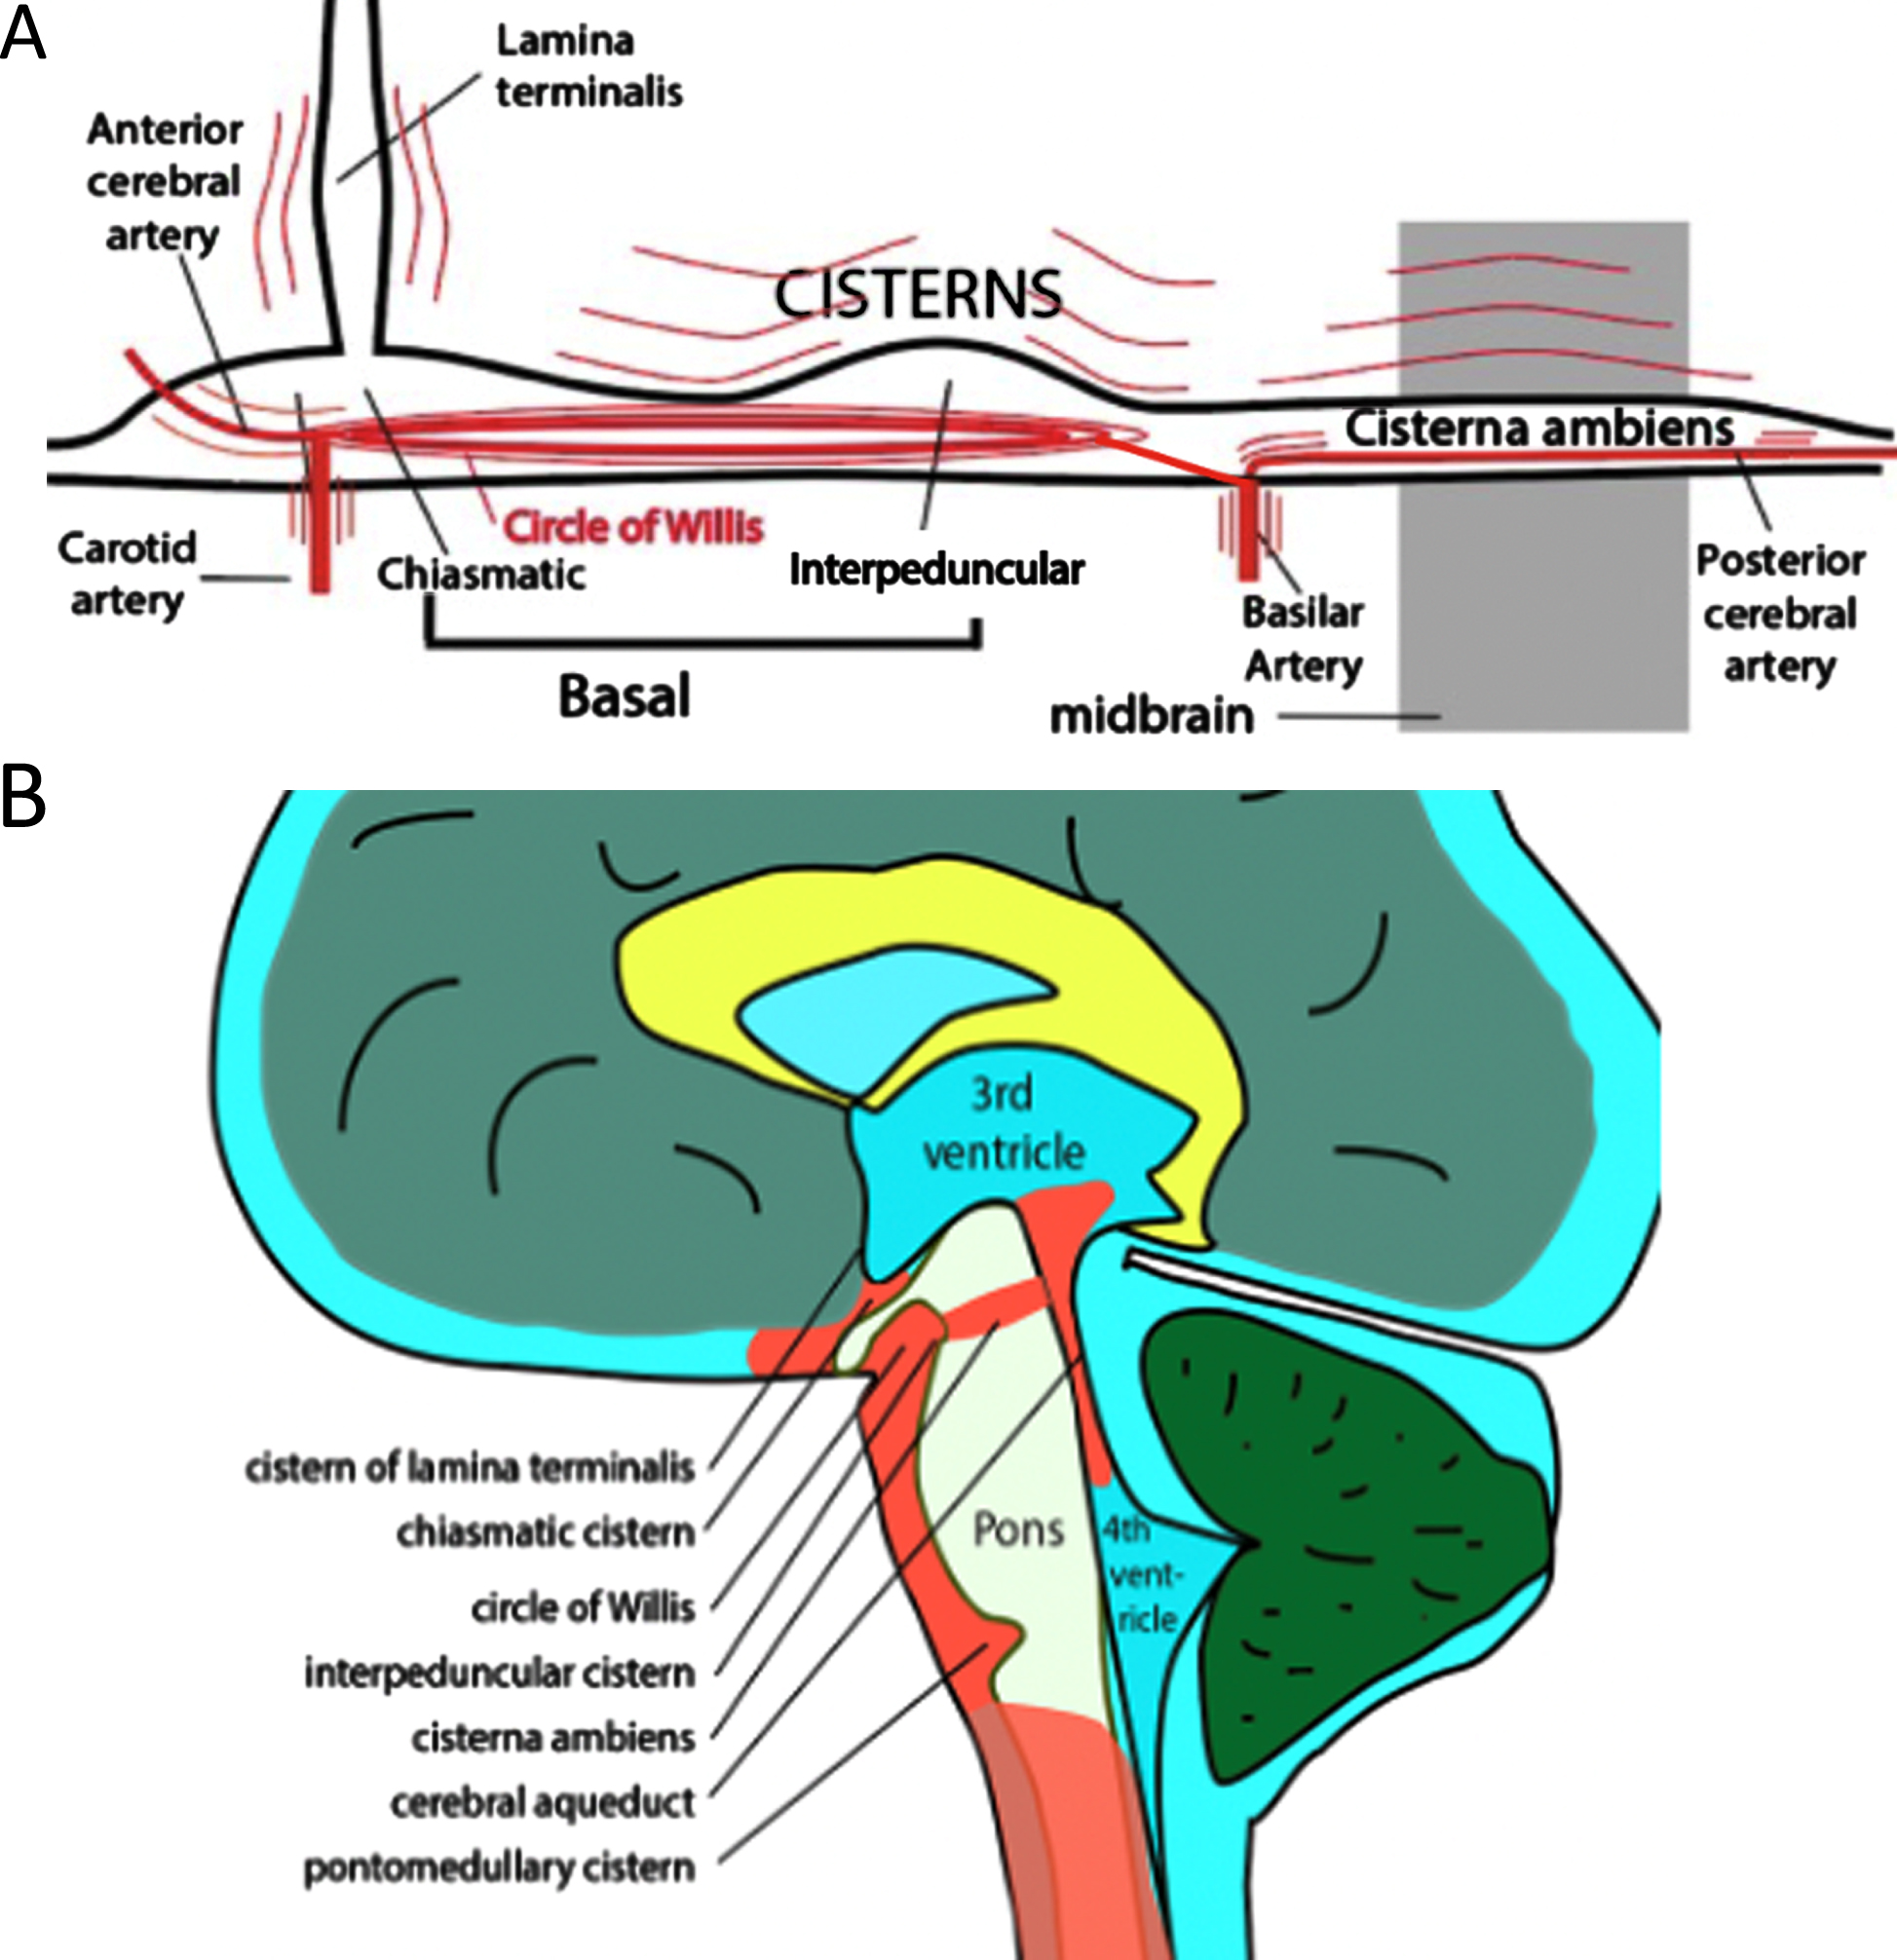 A) A sketch of hot spot cisterns in the circle of Willis and midbrain regions. Pulsating arteries and regions surrounding them are in red. B) A sagittal view of the brain cistern locations.